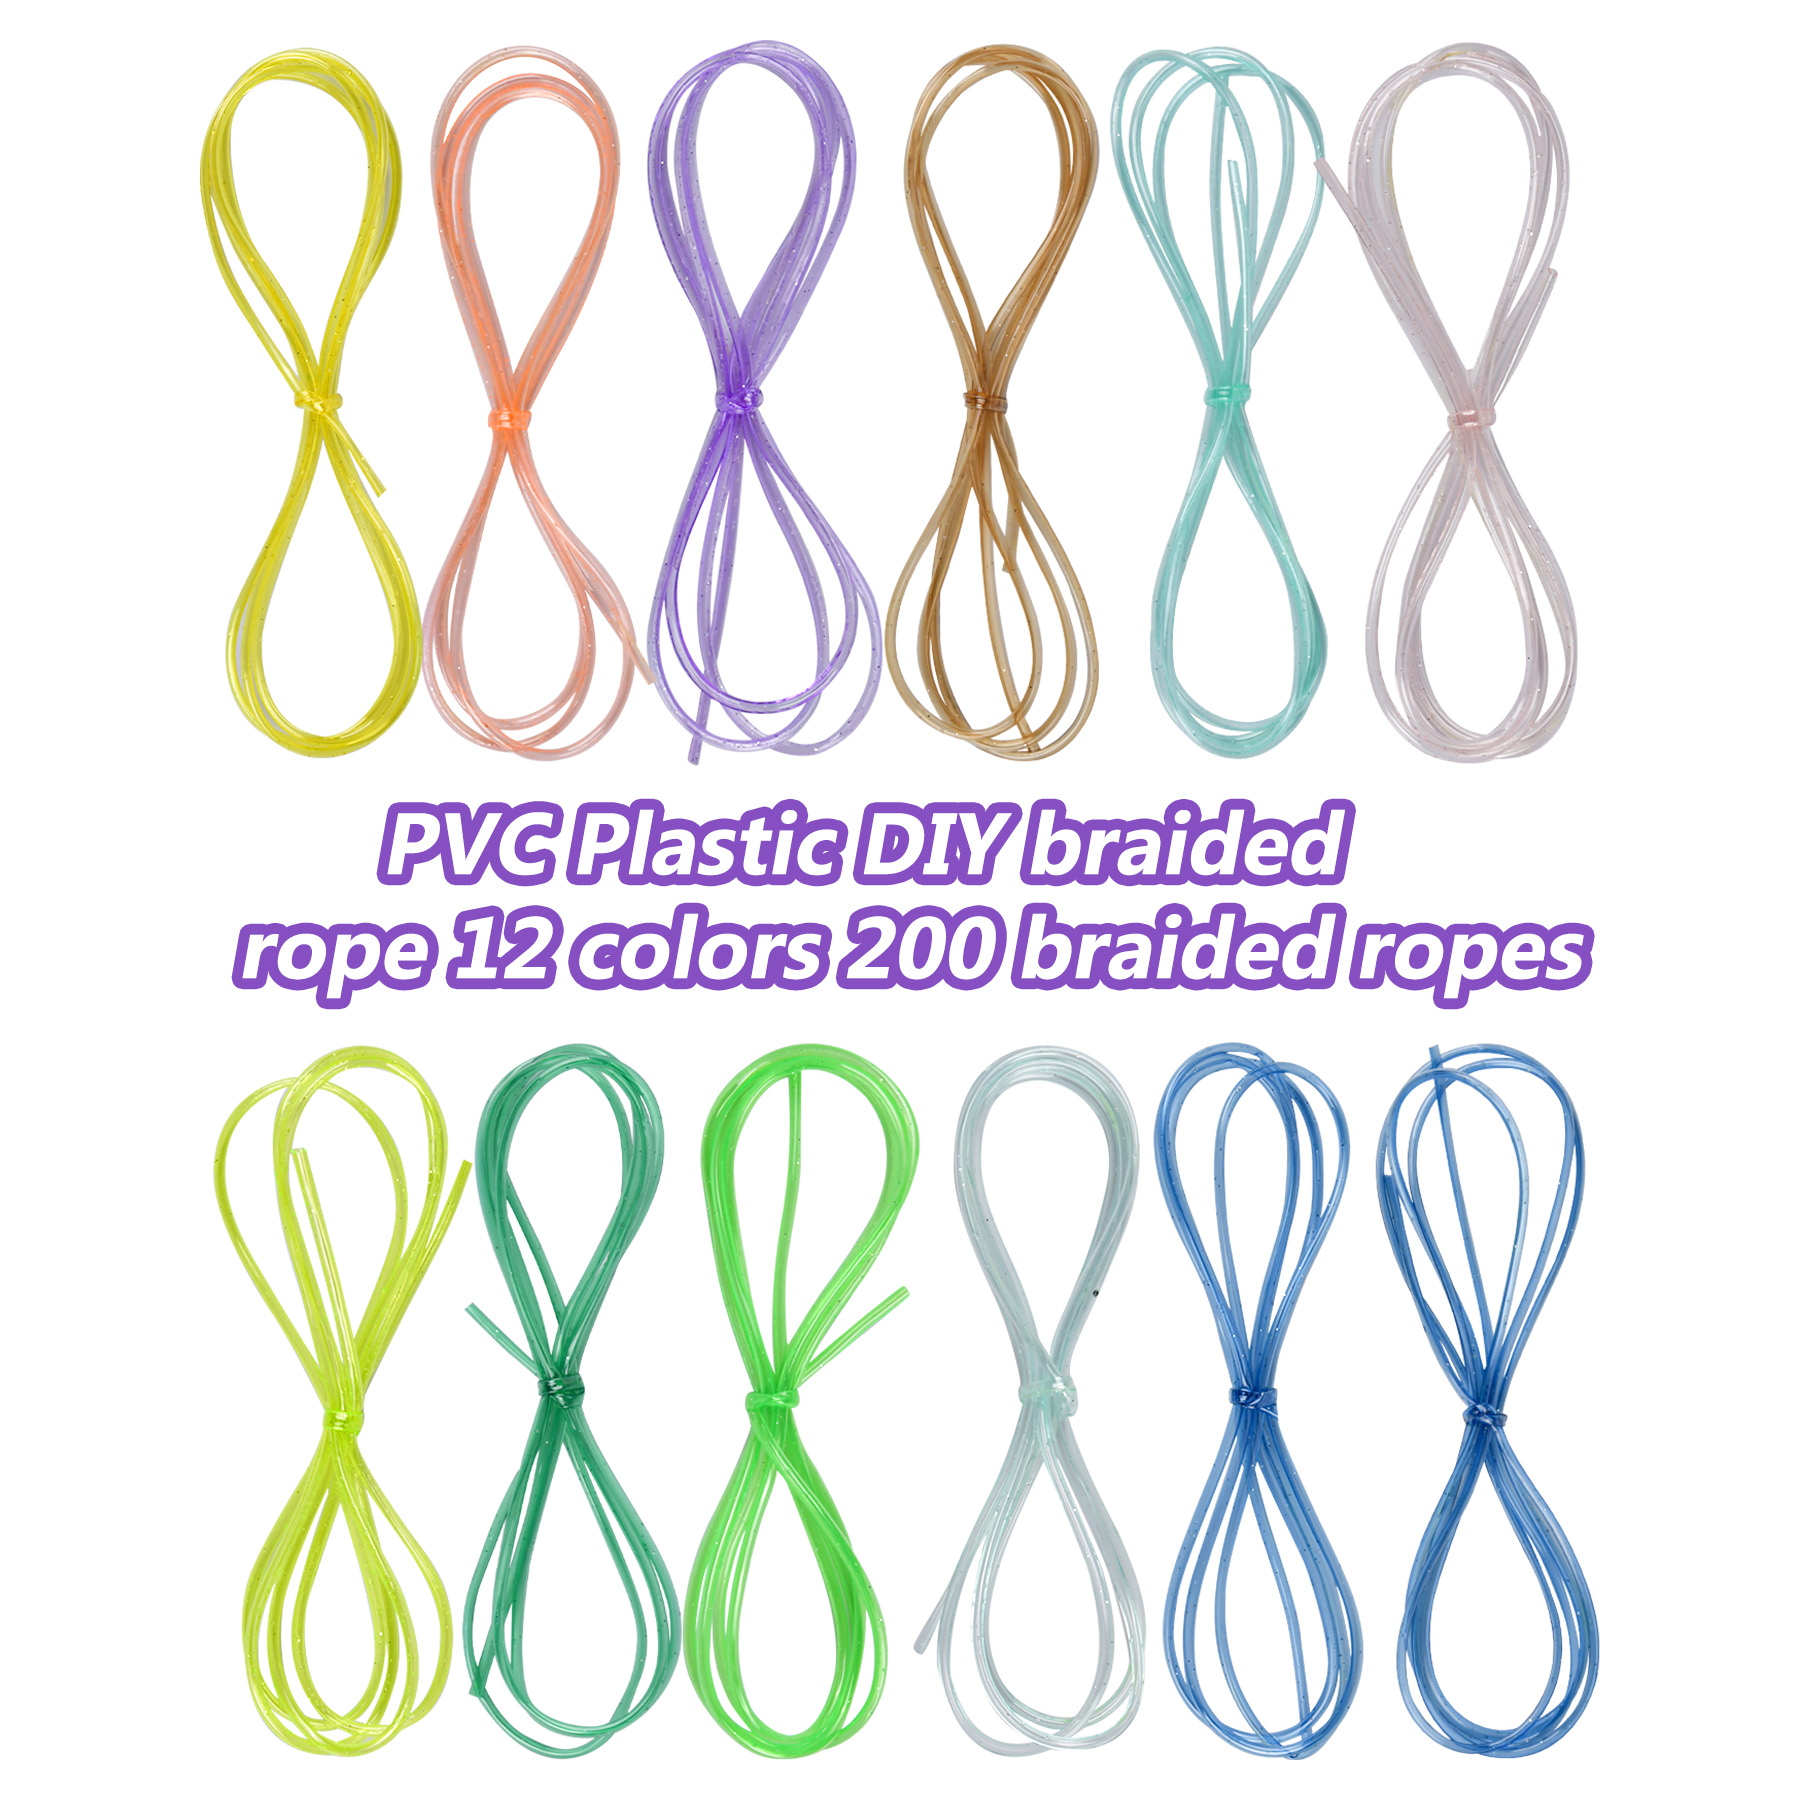 Plastic Lacing Cord String 20 Rainbow Colors for Bracelets Ornaments Art  Crafts Kits Jewelry Making Bracelets Necklaces